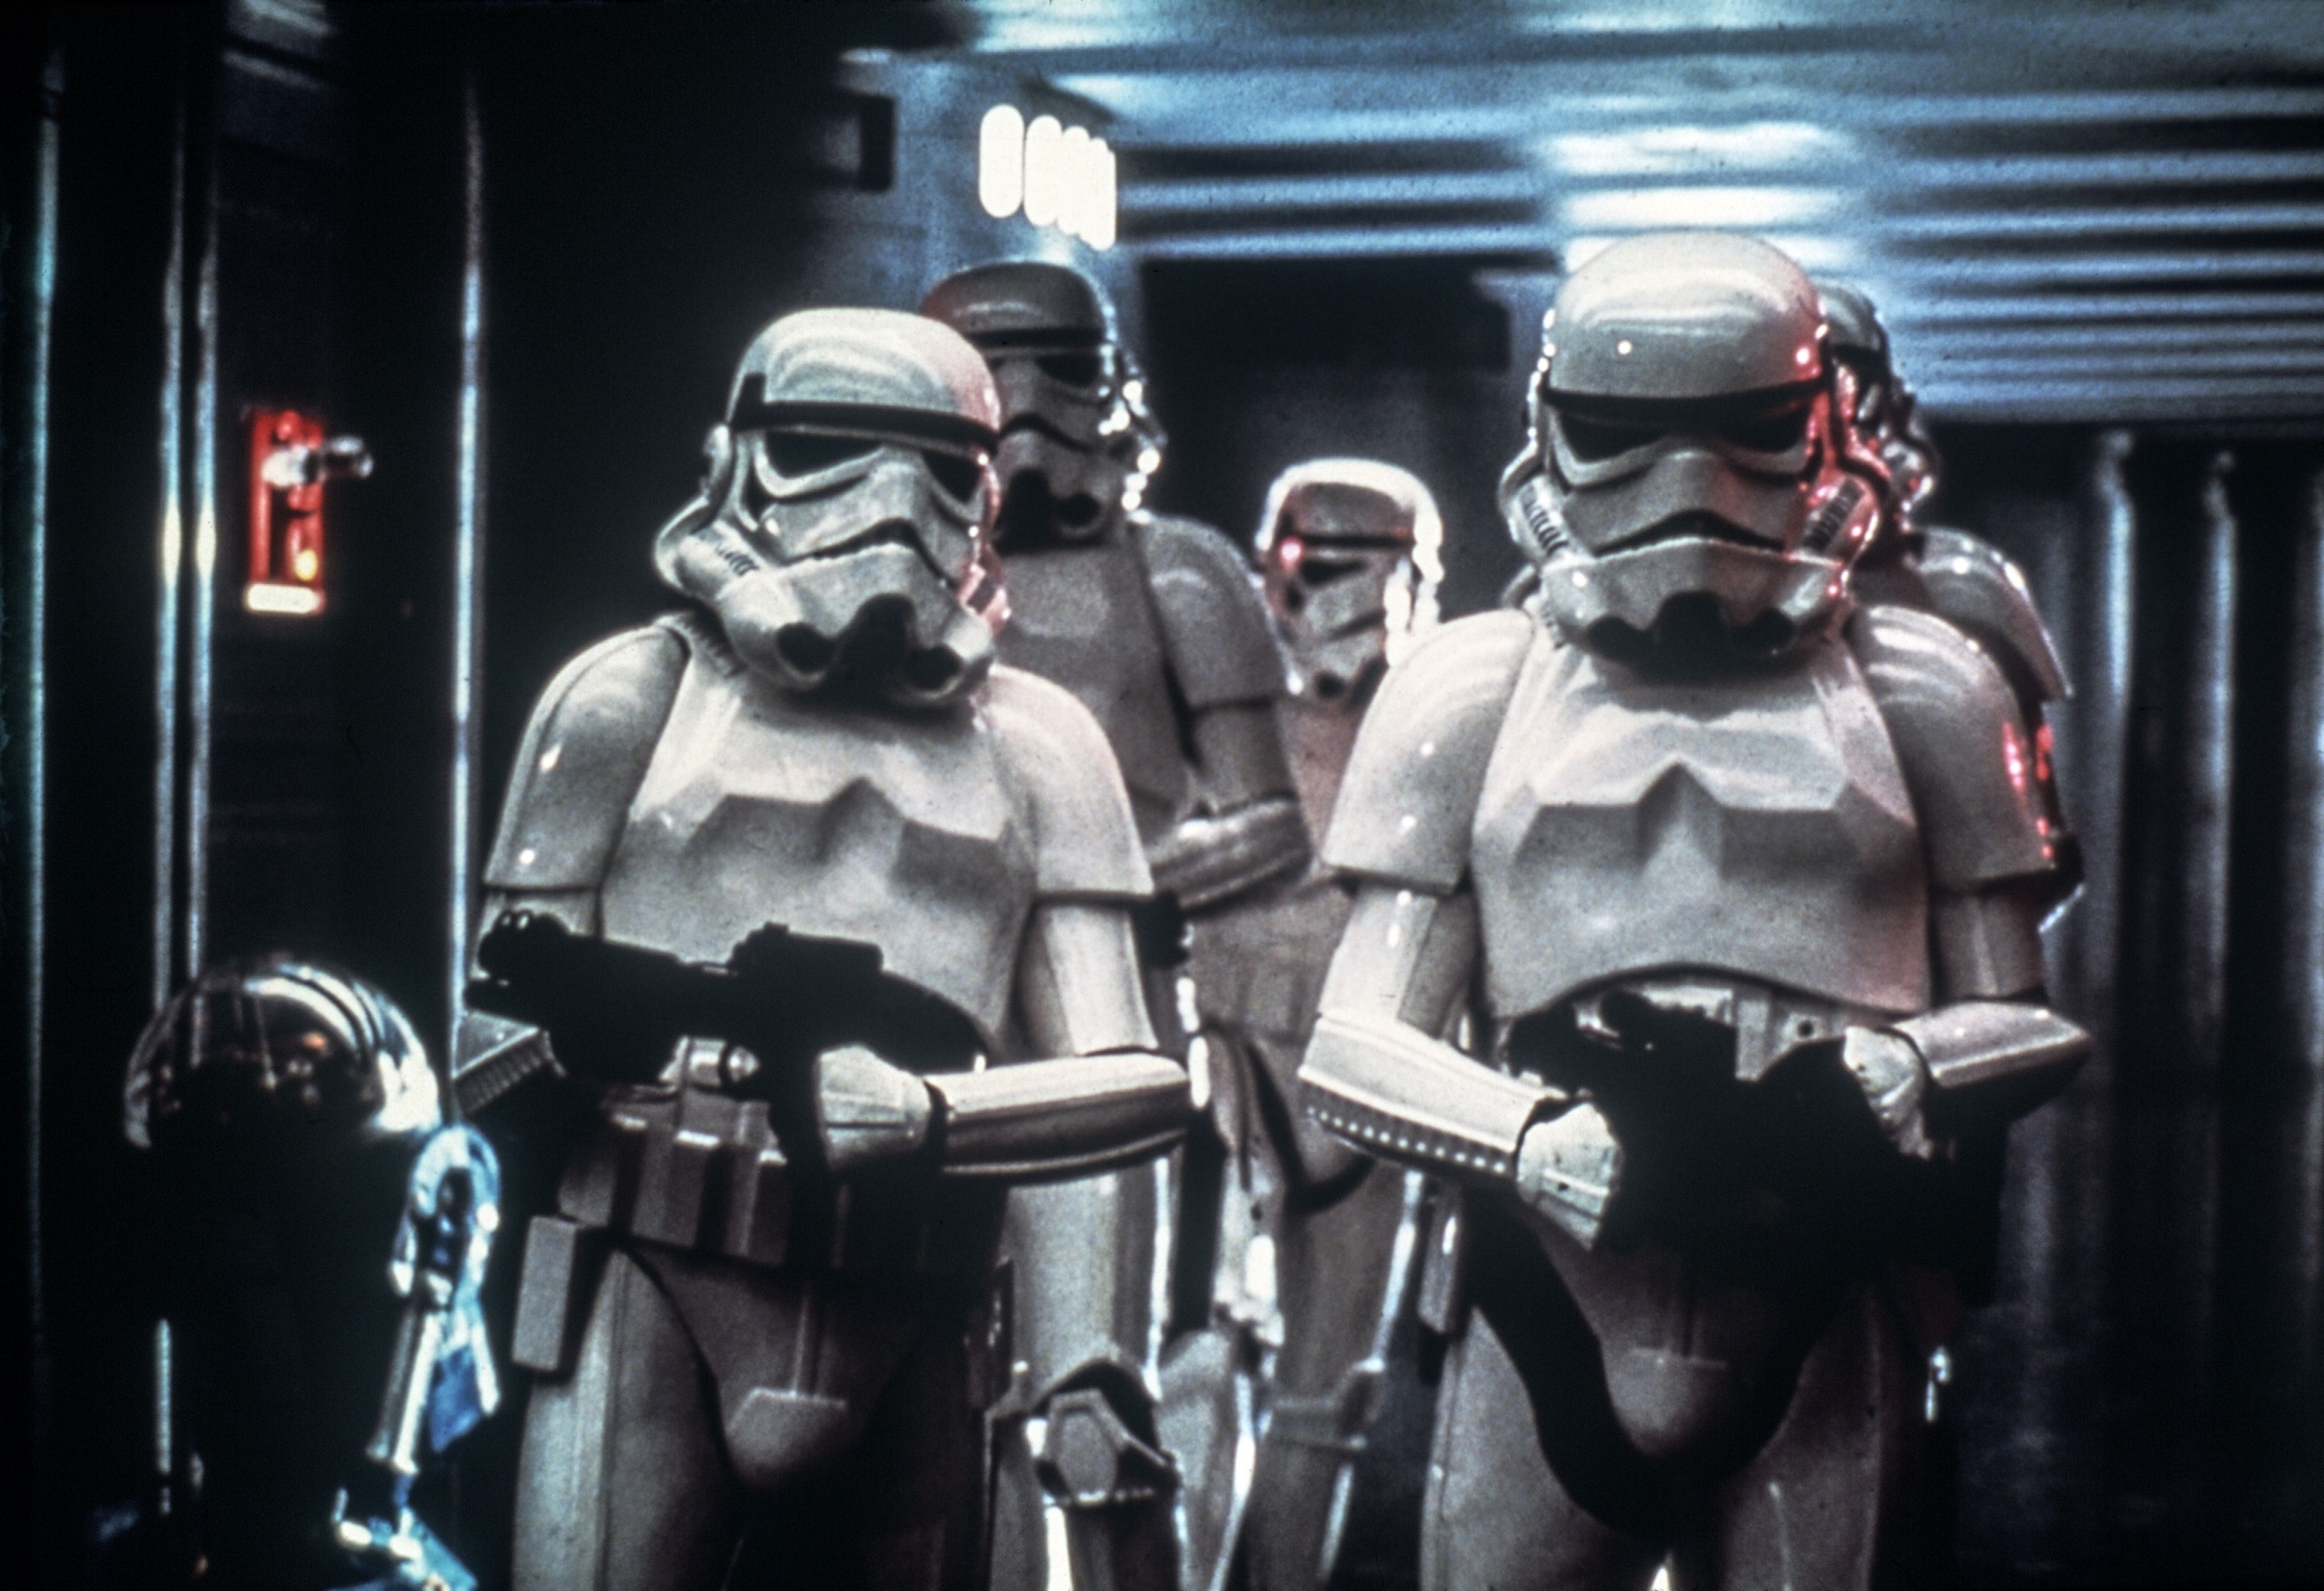 Group of Stormtroopers from Star Wars with blasters, alongside a black astromech droid in a spaceship corridor